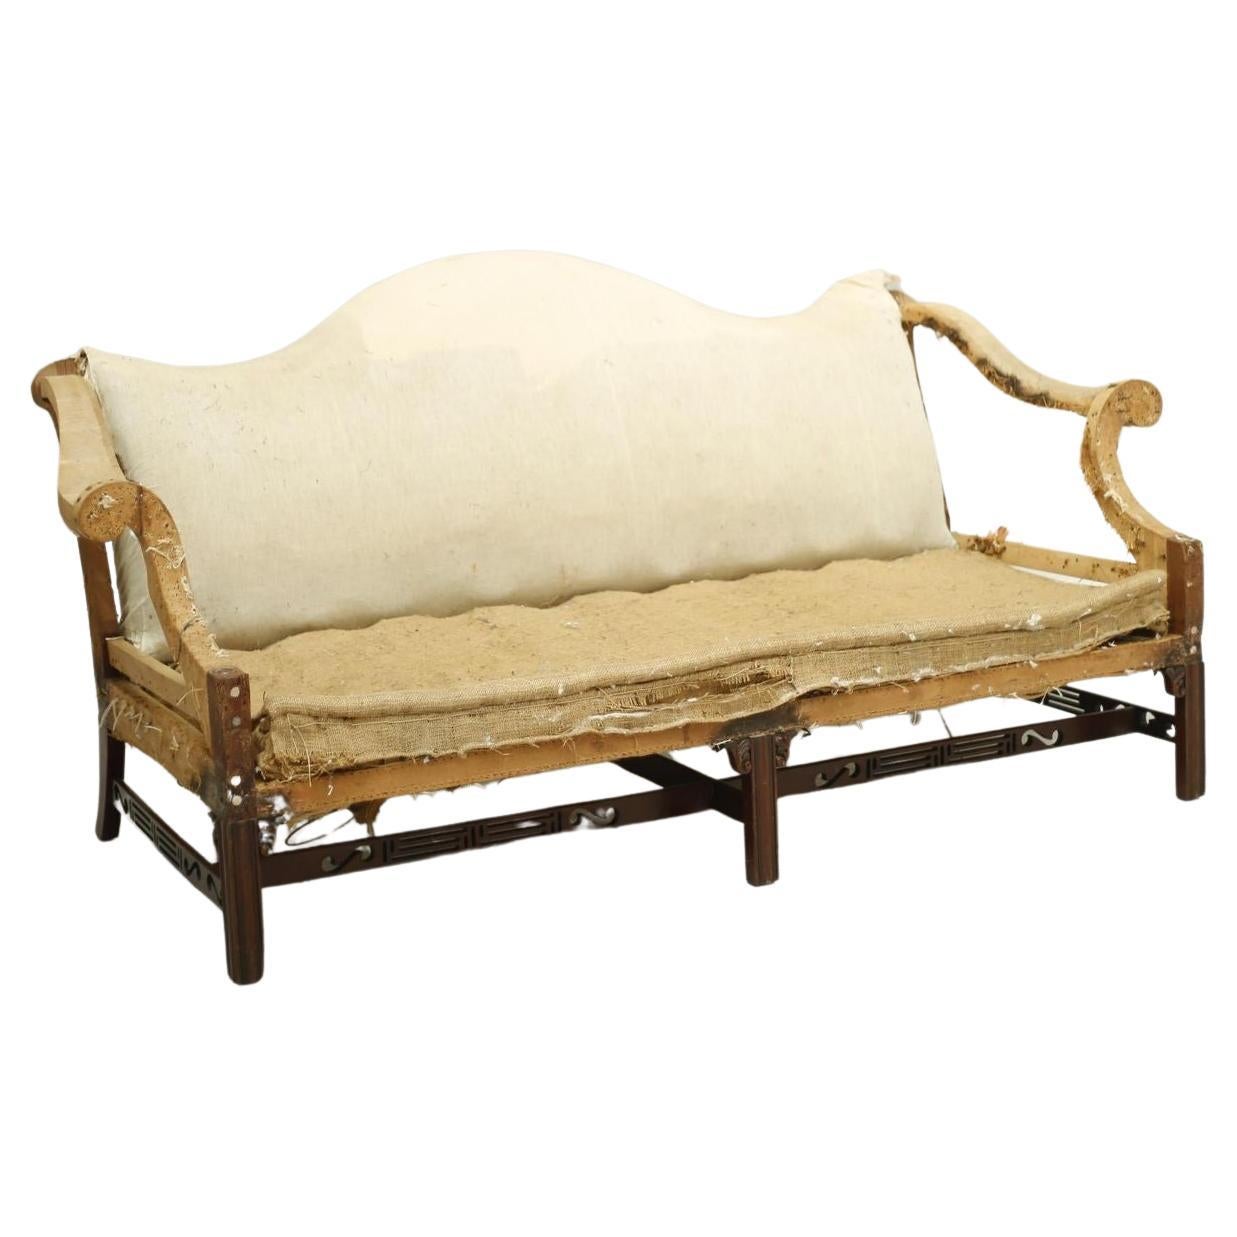 American c.1930's Camel Backed Sofa with Fret Work Stretcher For Sale